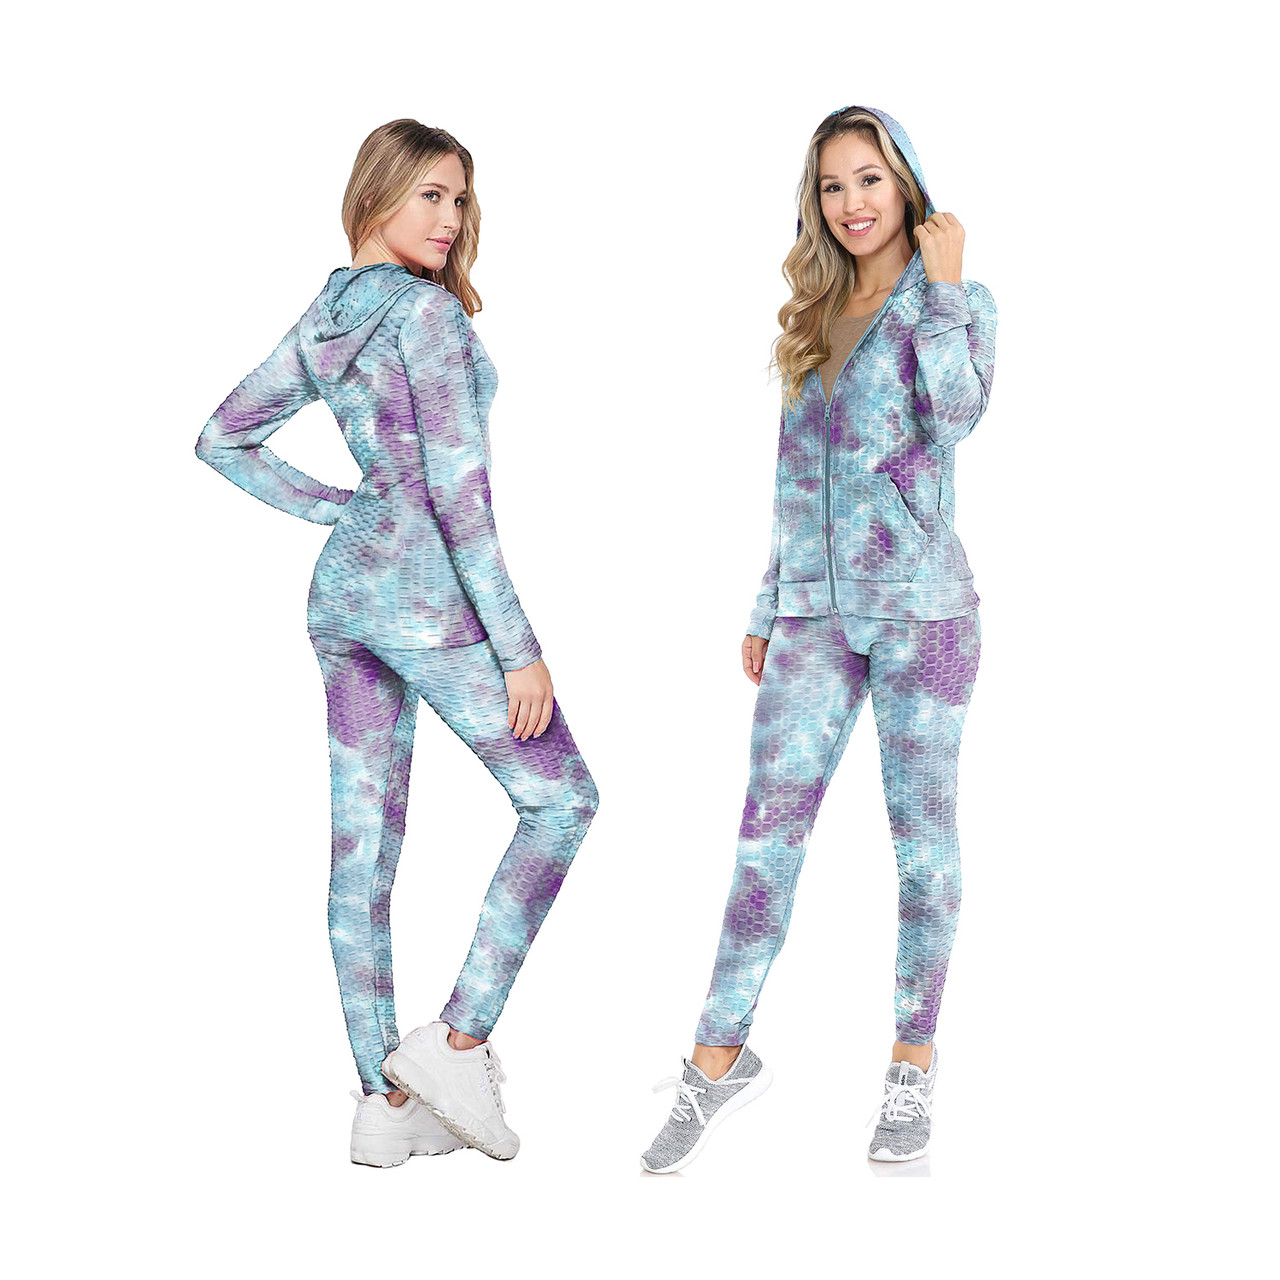 Women's 2-Piece Anti-Cellulite Textured Matching Hooded Top & Bottom Tracksuit product image